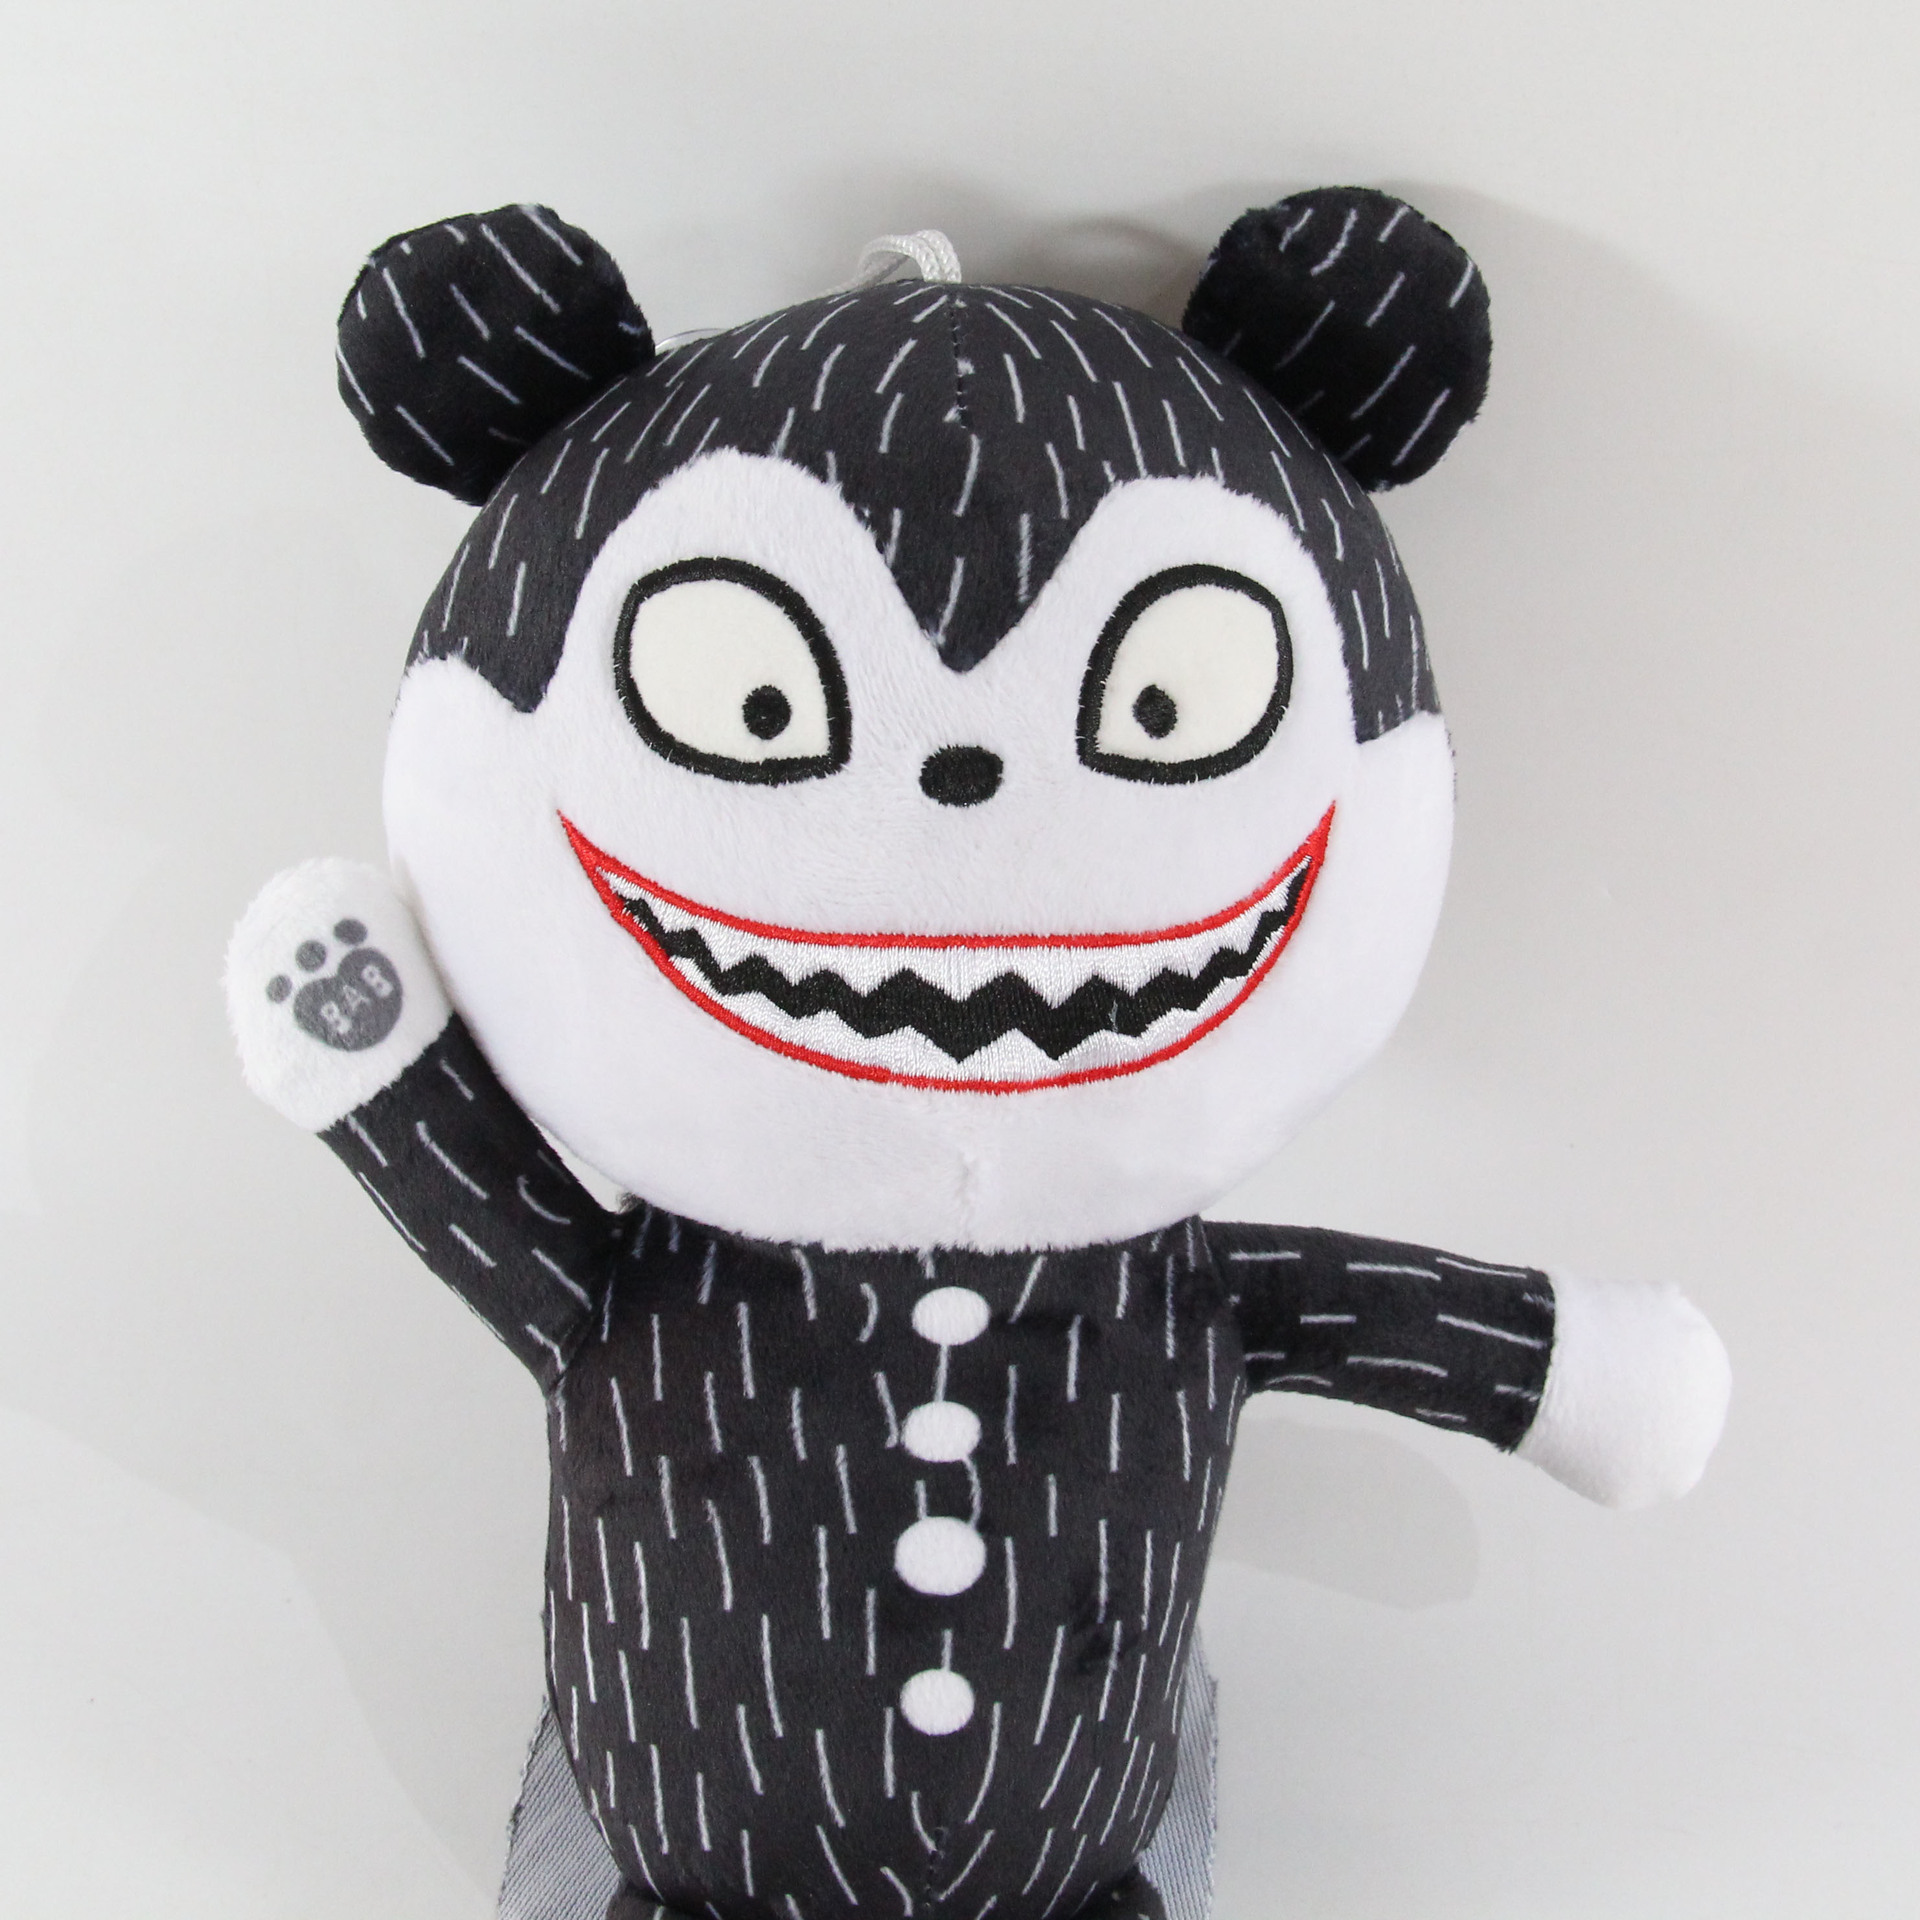 Anime Plushies Funny Anime Plush Toys: Thriller Creativity Dolls for All Ages